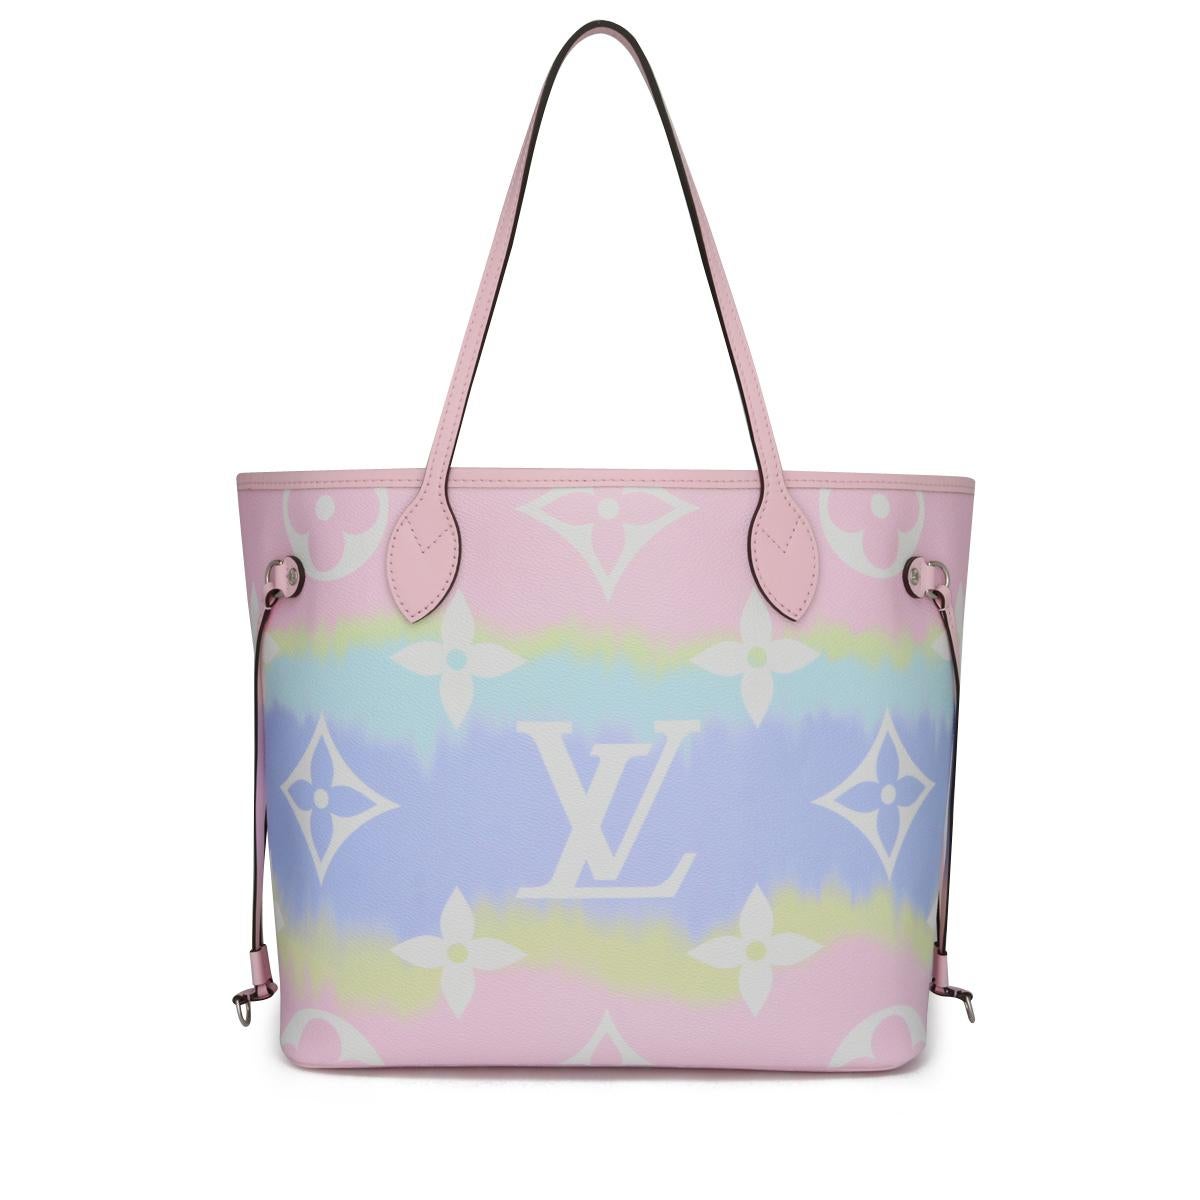 Louis Vuitton Escale Neverfull MM Bag in Pastel Rainbow with Periwinkle Interior with Silver-Tone Hardware 2020 Limited Edition.

This bag is in pristine condition.

Finding this particular style bag in excellent condition becomes extremely